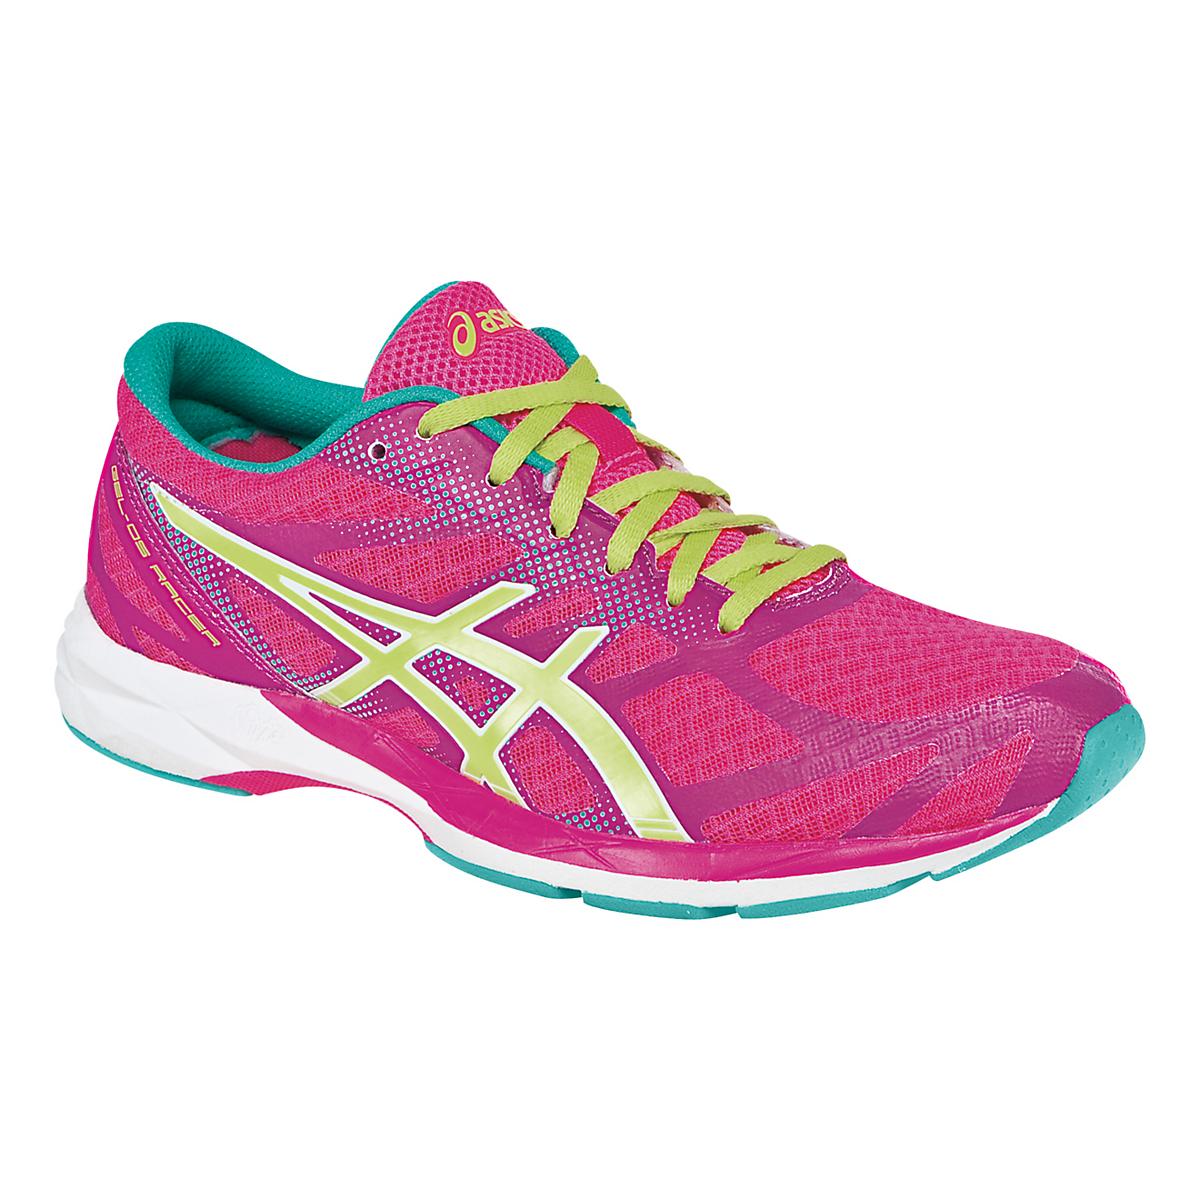 Womens ASICS GEL-DS Racer 10 Racing Shoe at Road Runner Sports